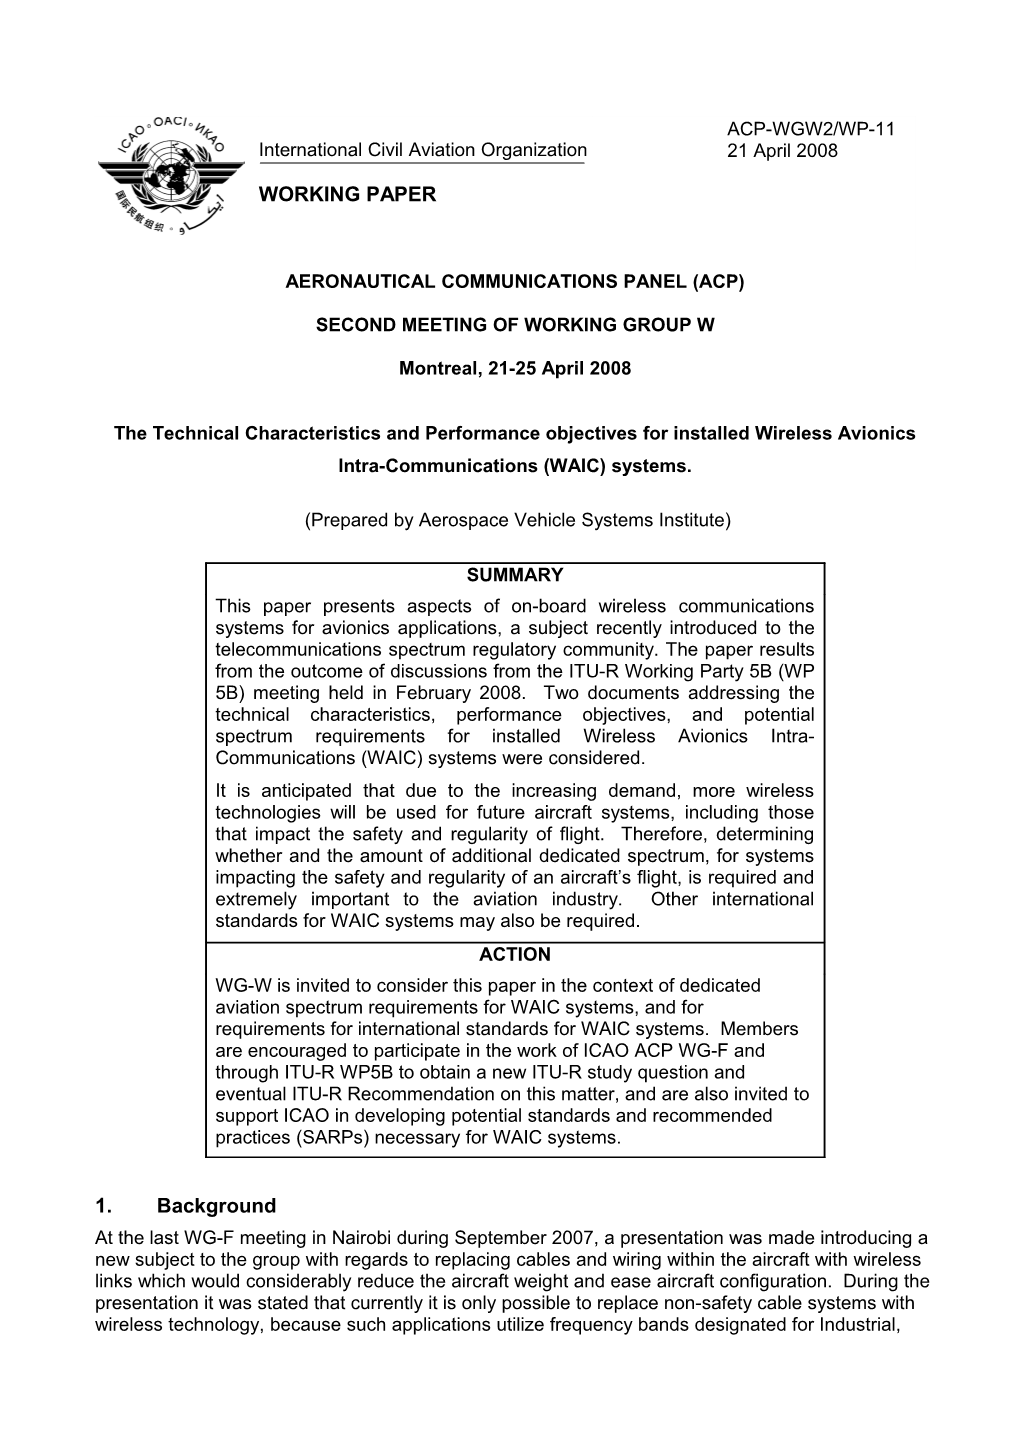 The Technical Characteristics and Performance Objectives for Installed Wireless Avionics